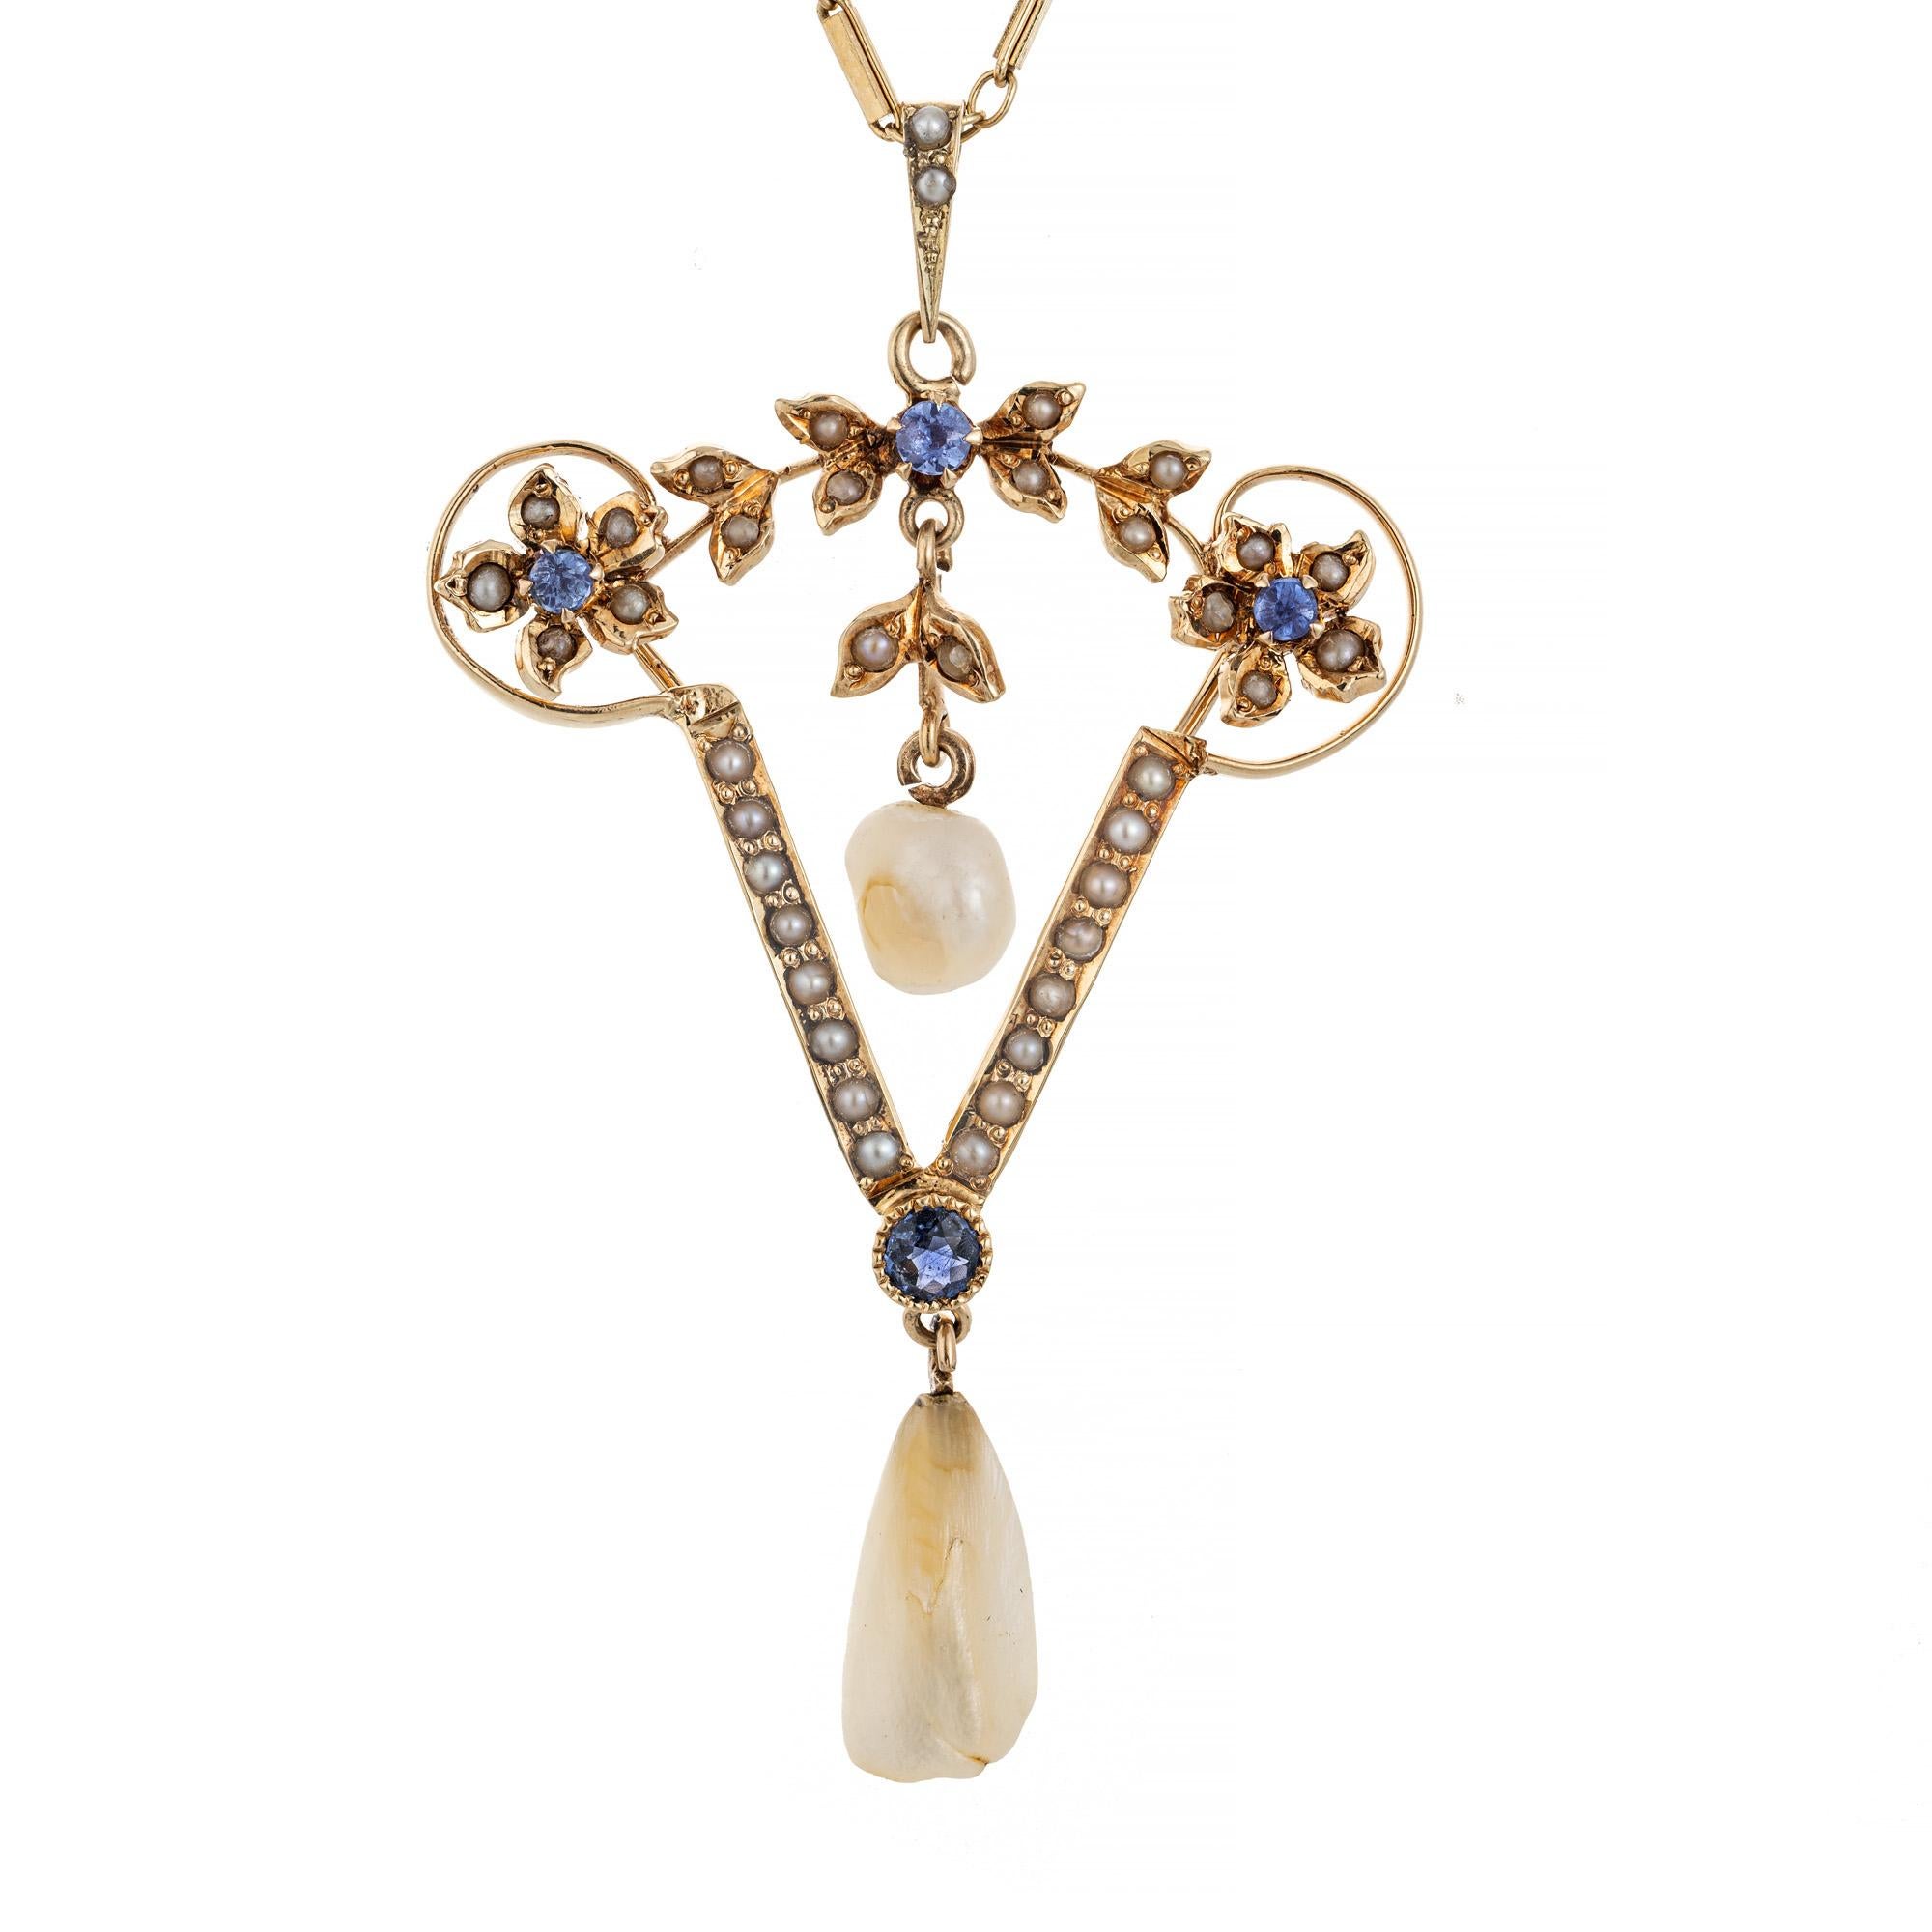 1910 Pearl and Sapphire pendant necklace. GIA certified natural untreated round sapphires in a 14k yellow gold pendant setting accented with 2 natural baroque freshwater pearls, with a 19 inch 14k yellow gold chain. One pearl and one sapphire were